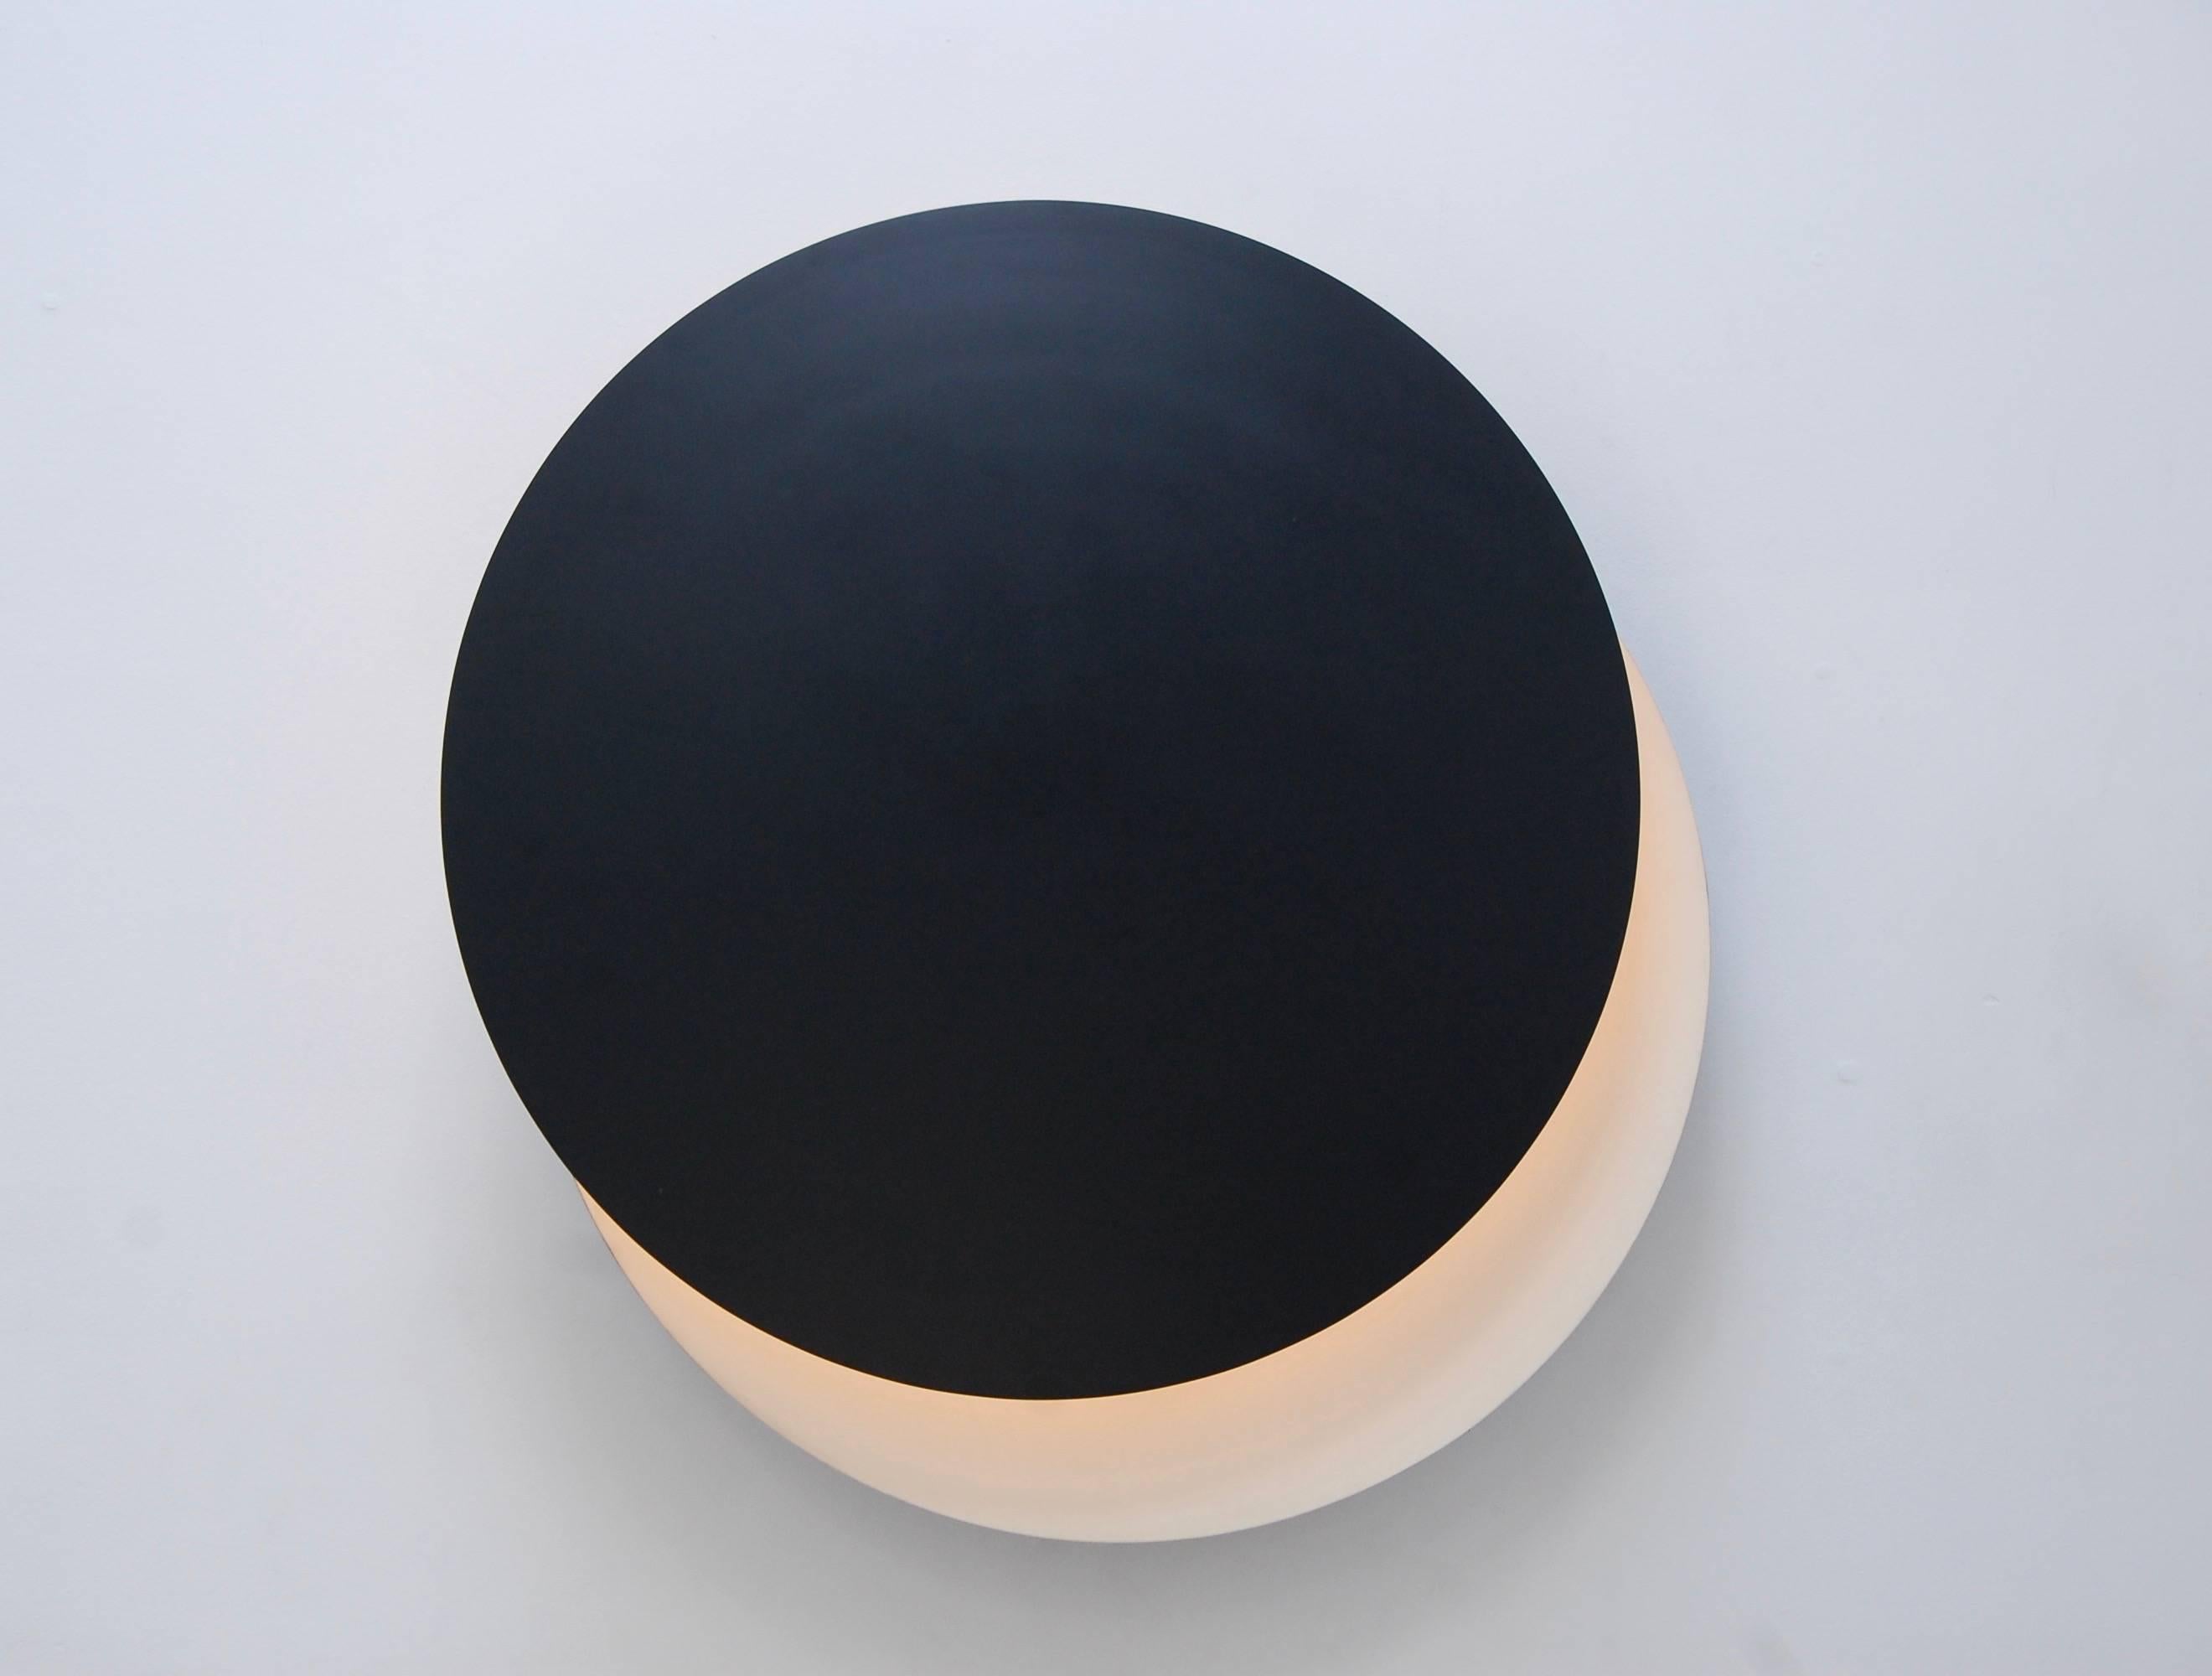 Stunning and dramatic large Luclipse wall fixture. This fixture acts as a mood piece and emits indirect lighting. The eclipse effect is created by a contrast between the front and back shade. The front shade can articulate in any direction to direct